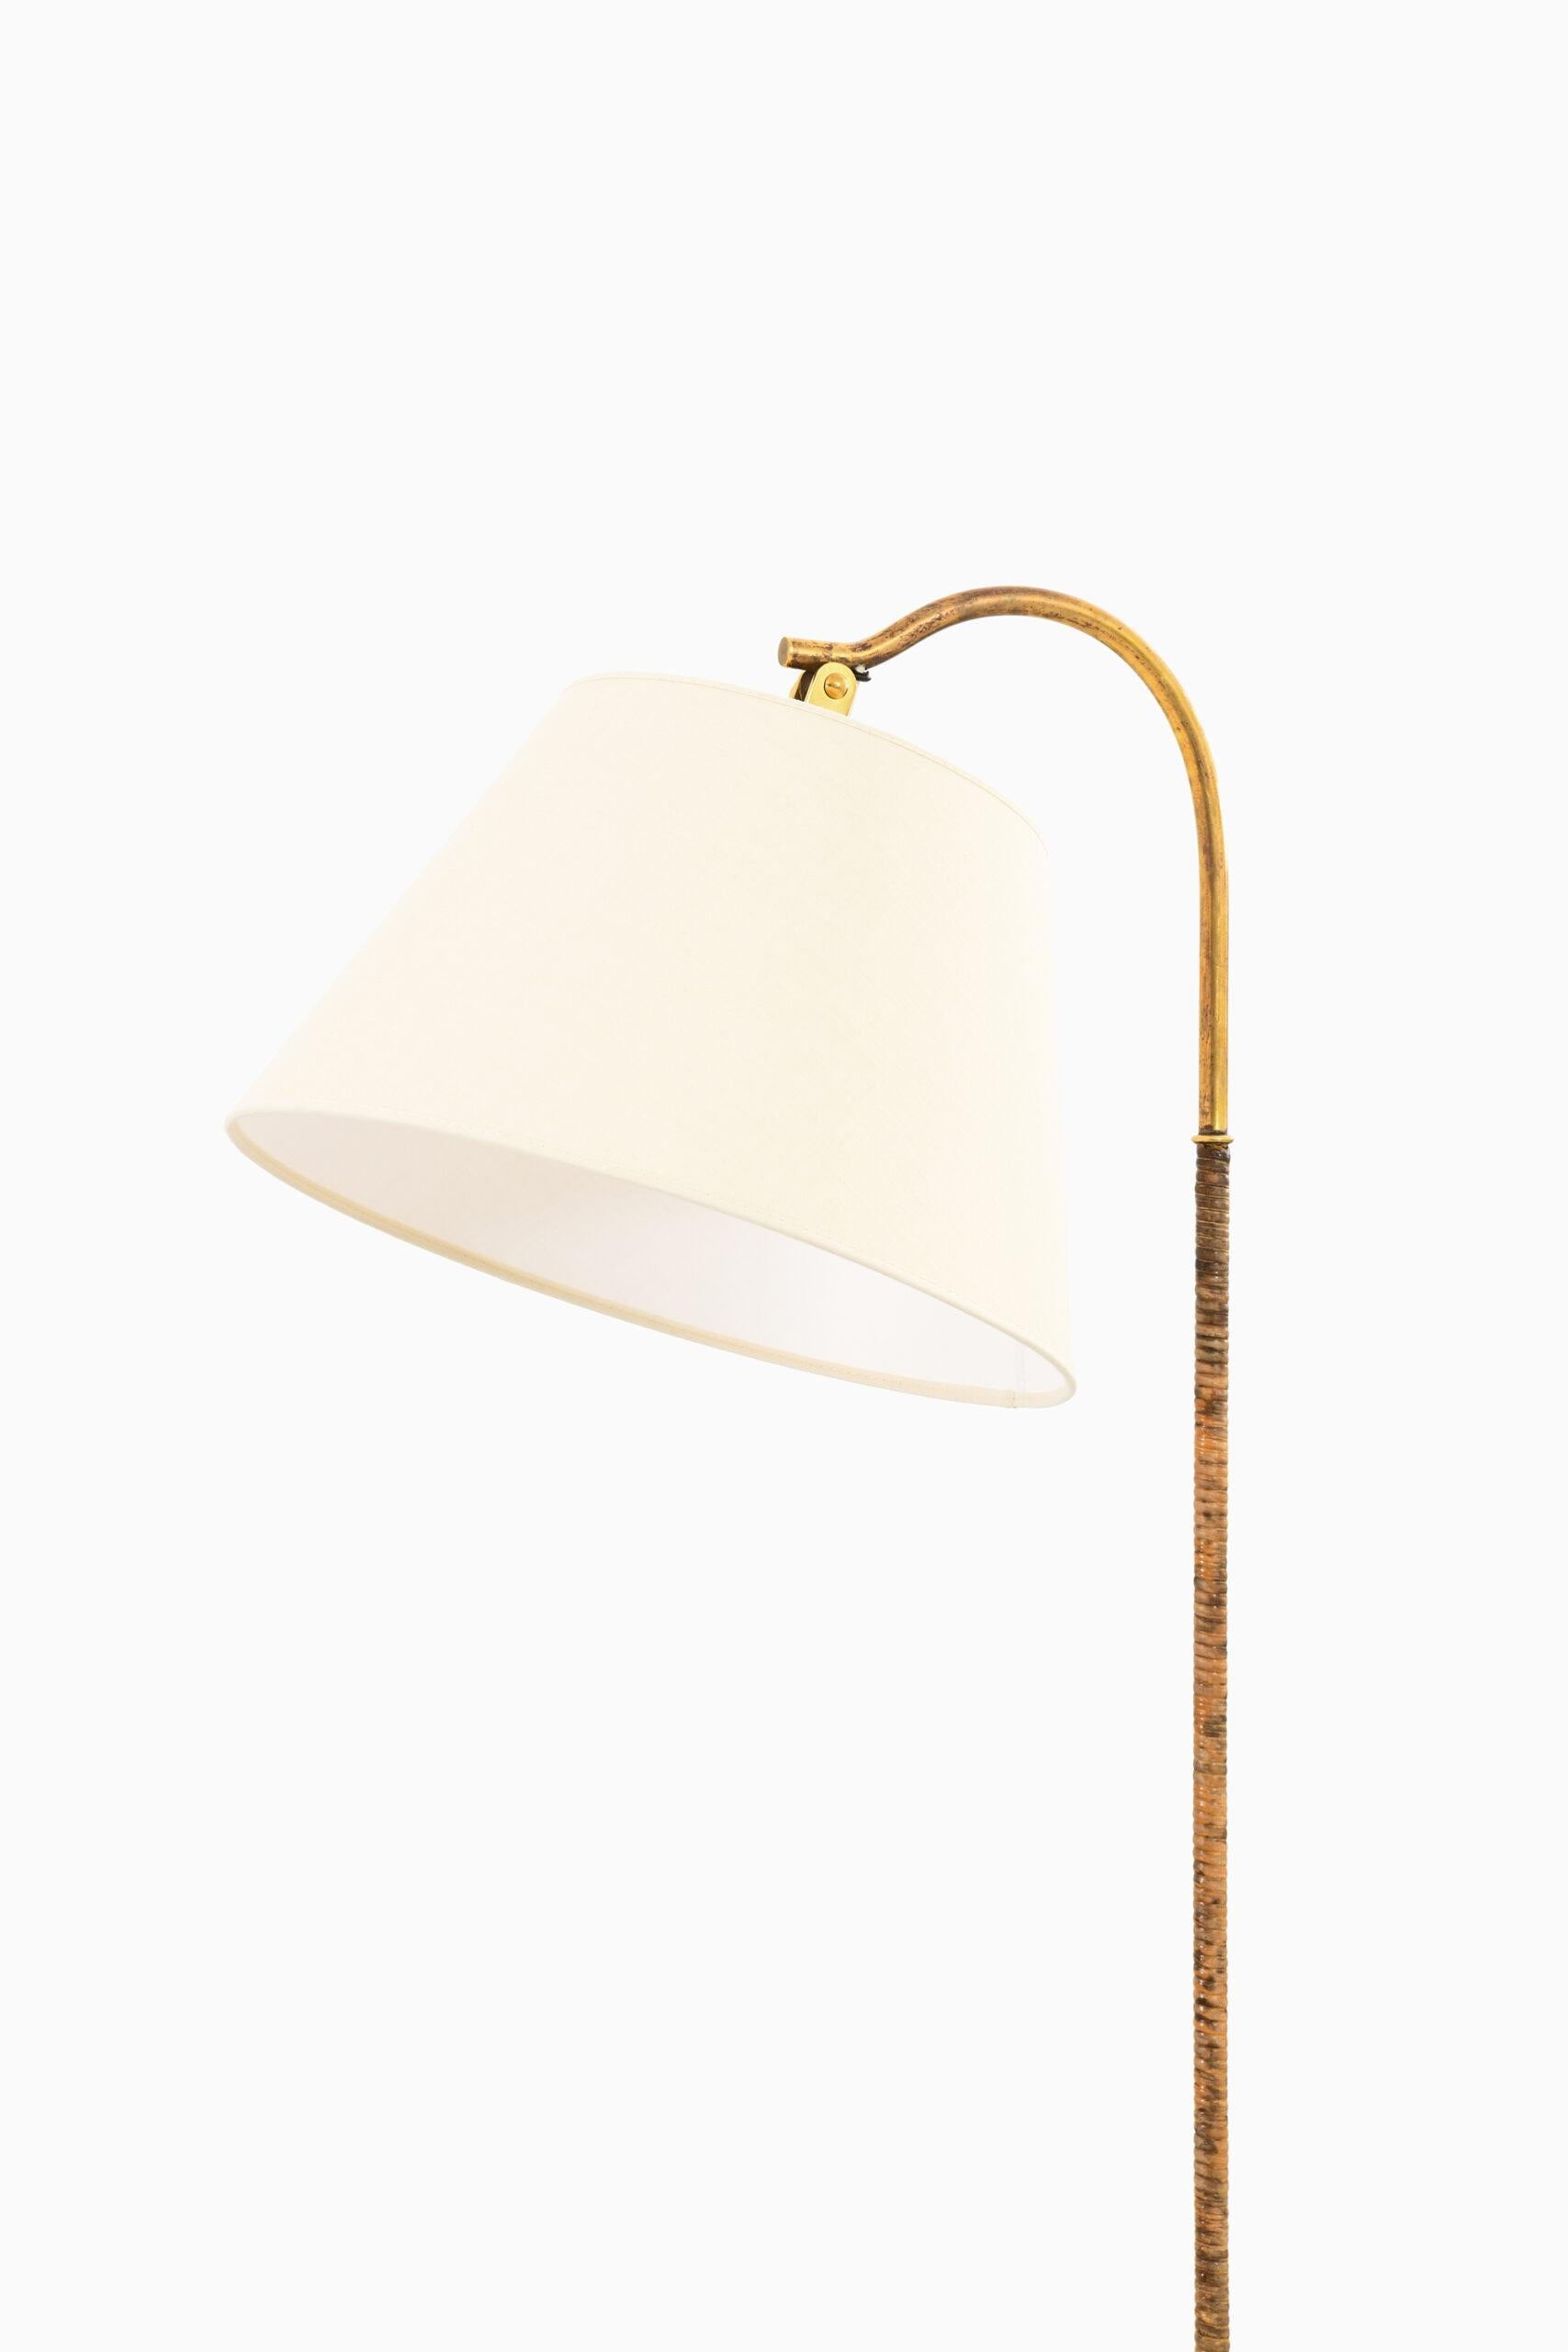 Scandinavian Modern Paavo Tynell Floor Lamp Model 9609 Produced by Taito Oy For Sale